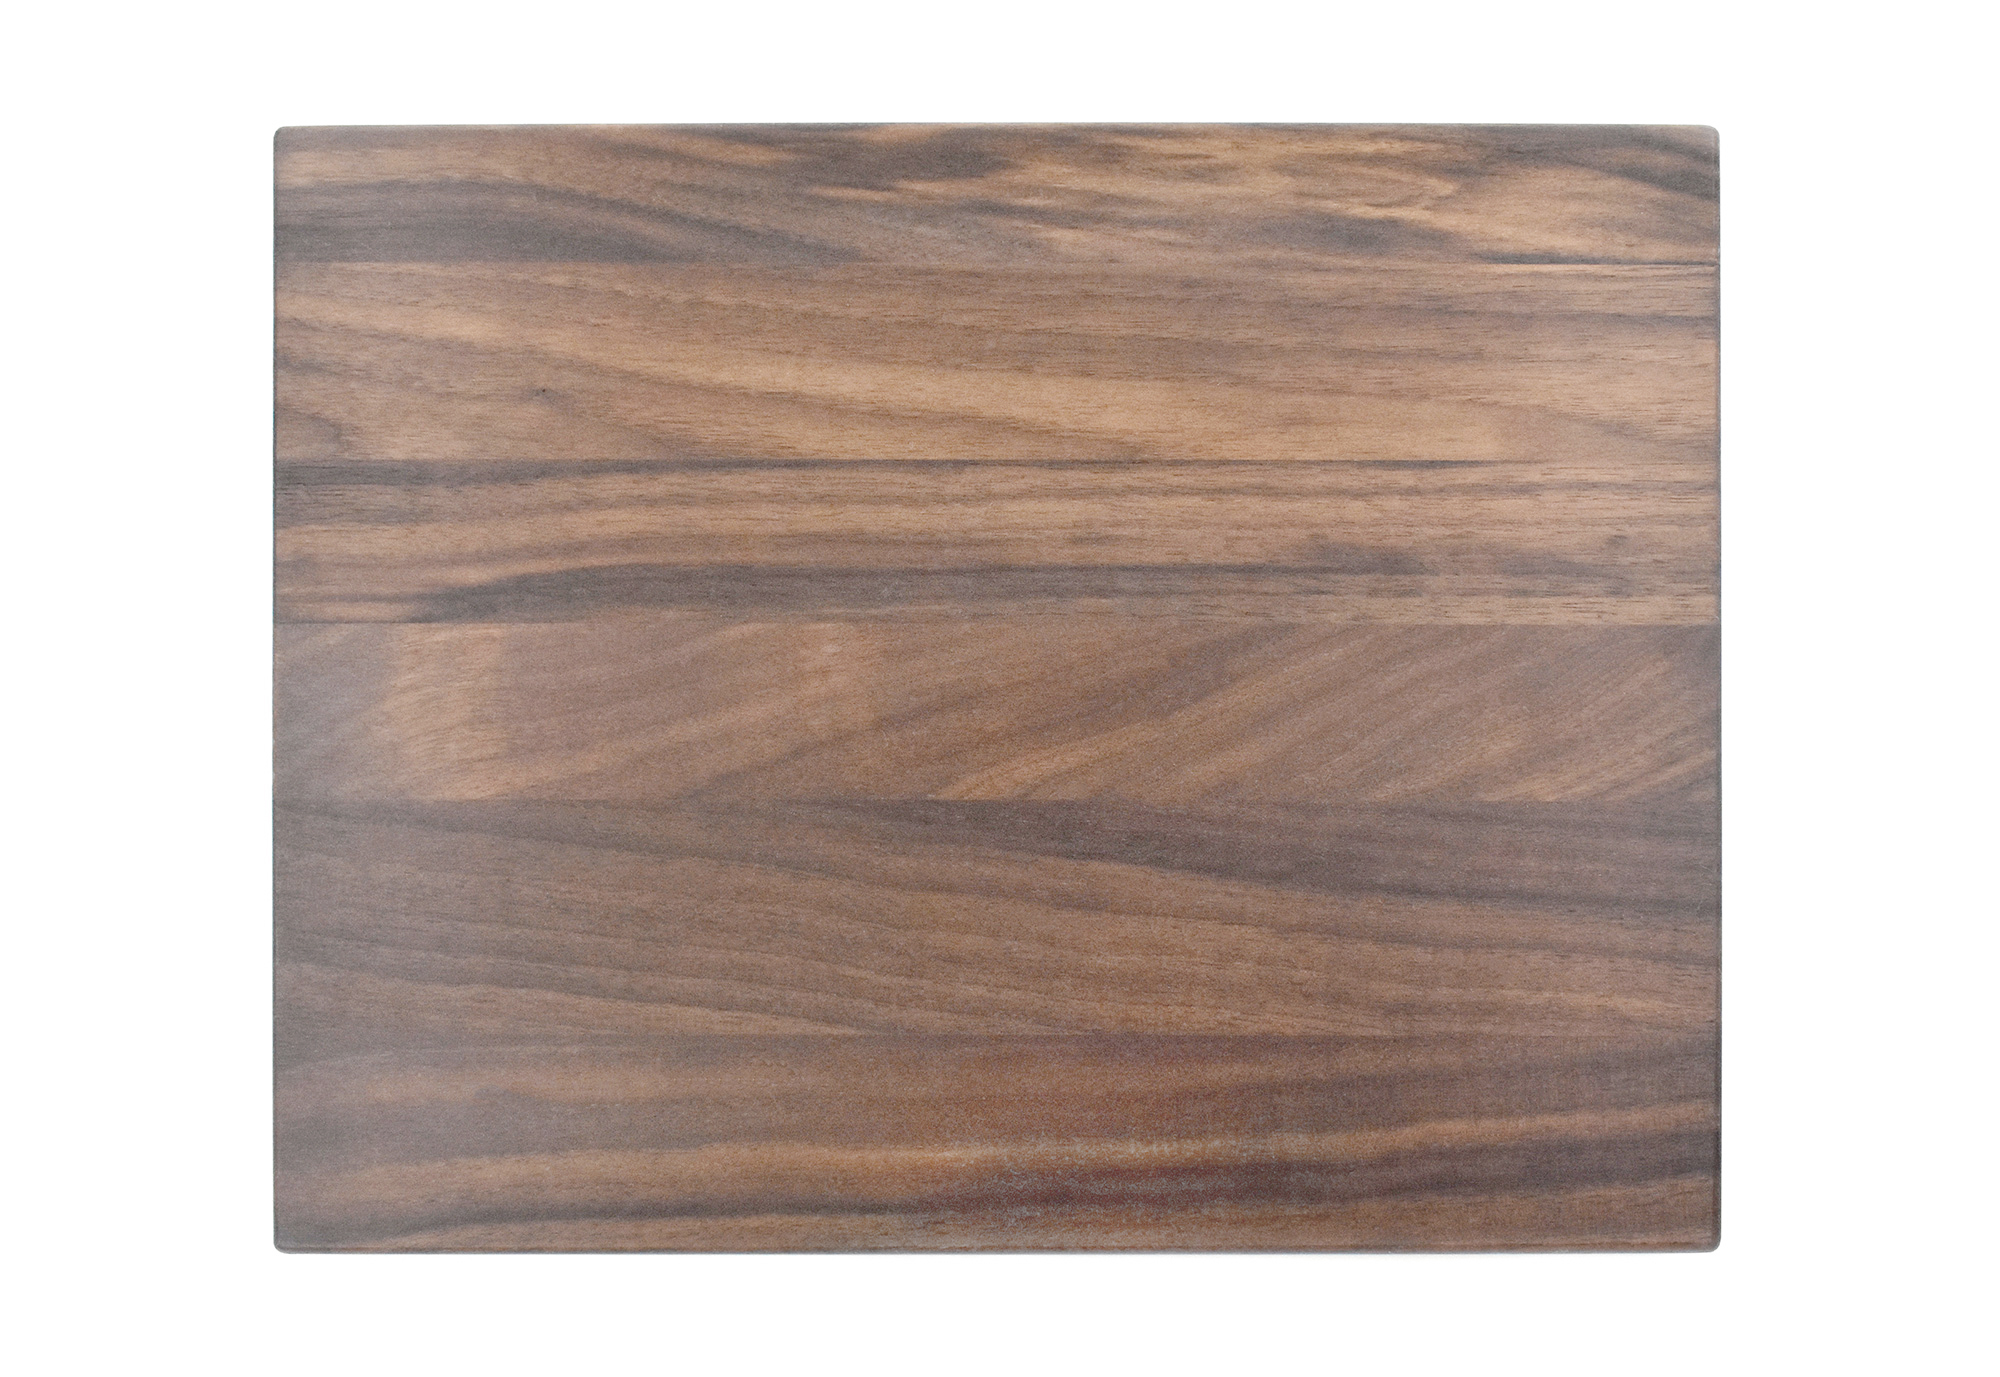 Walnut cutting board with rounded corners